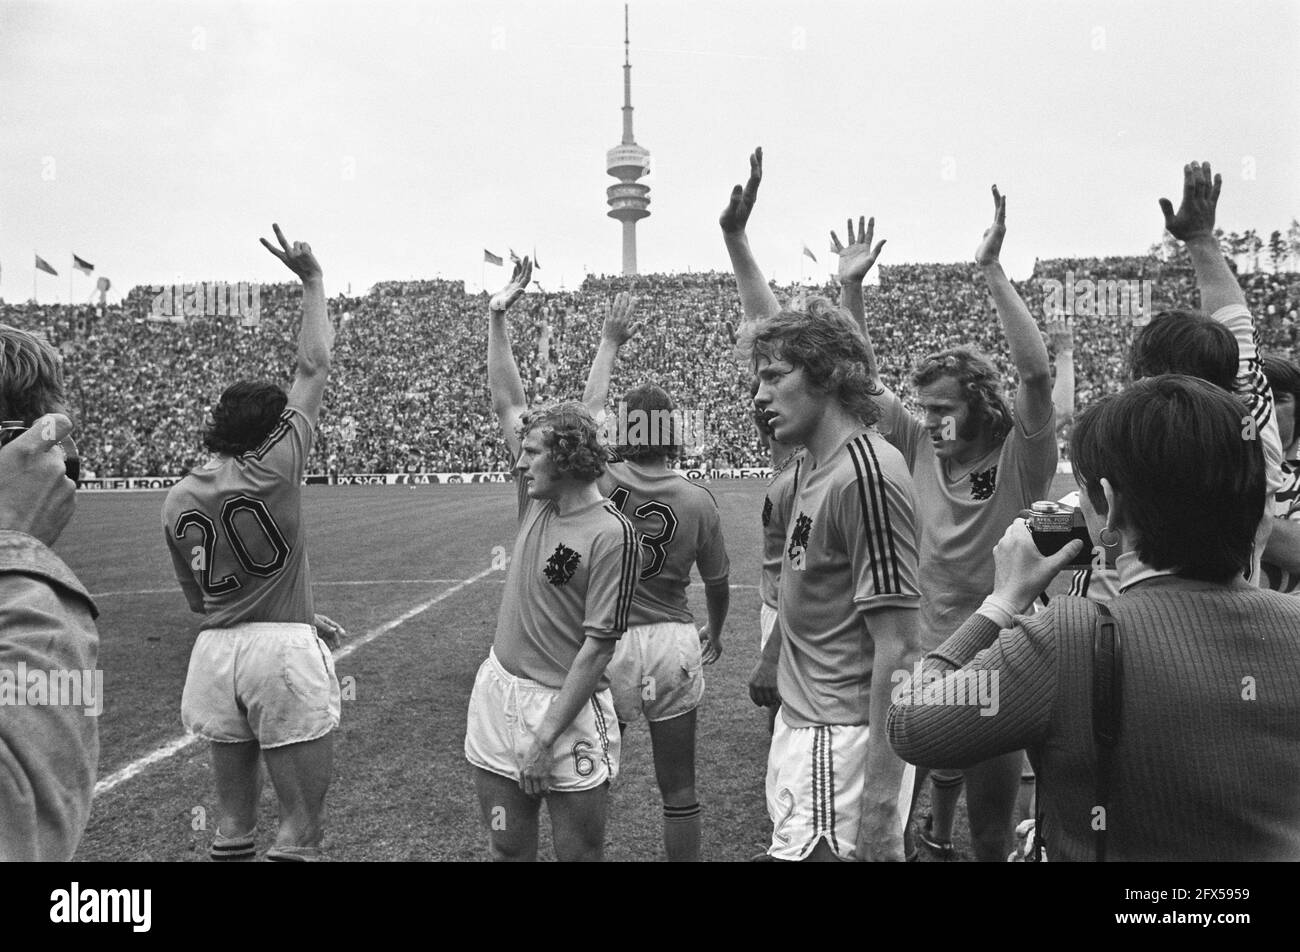 World Cup final 1974 in Munich, West Germany v Netherlands 2-1; Dutch players leave the field, July 7, 1974, finals, sports, soccer, world championships, The Netherlands, 20th century press agency photo, news to remember, documentary, historic photography 1945-1990, visual stories, human history of the Twentieth Century, capturing moments in time Stock Photo